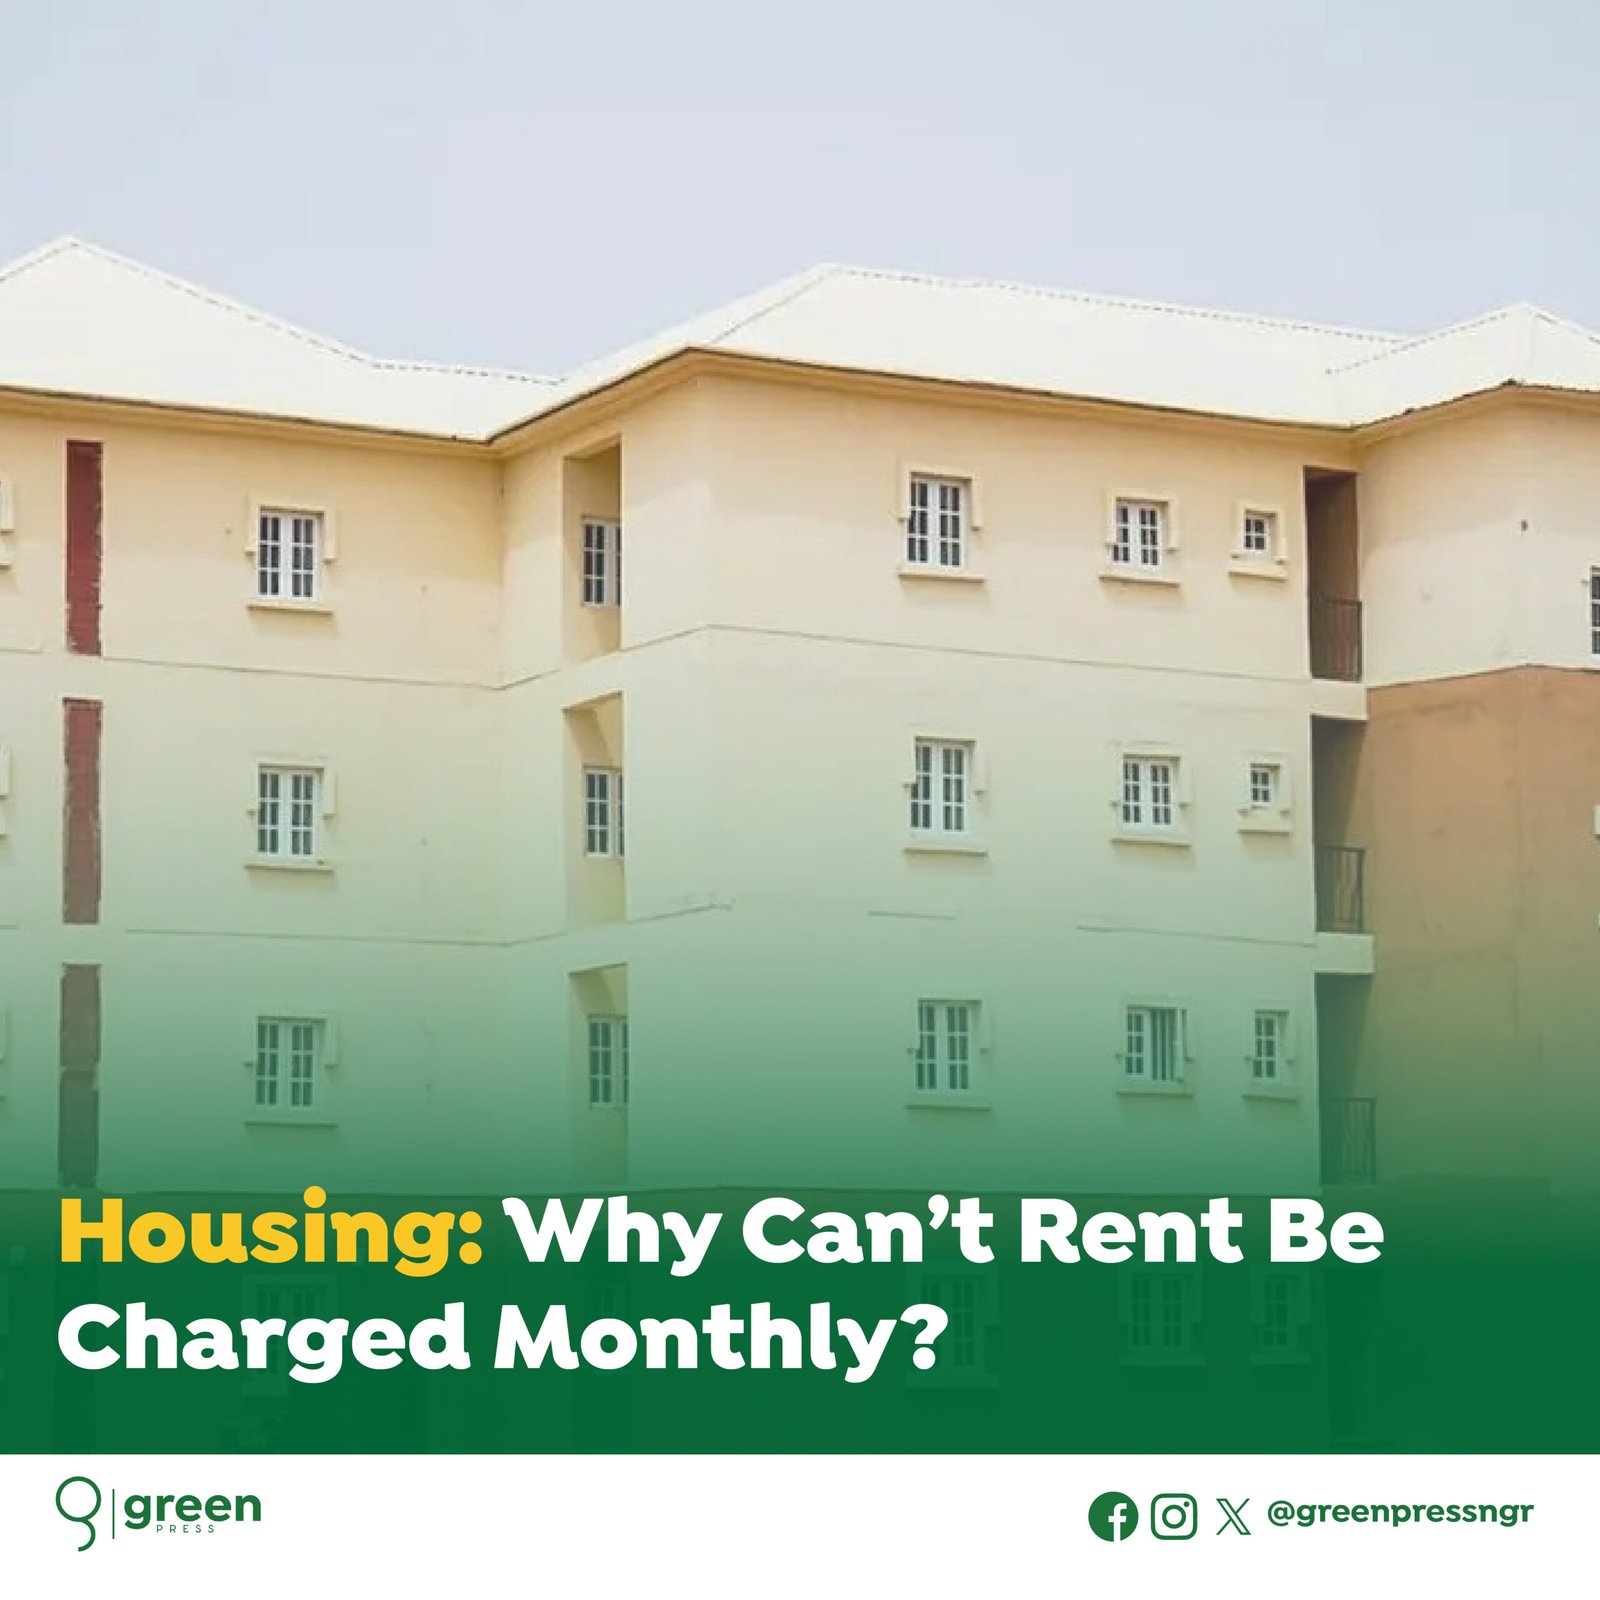 [EDITORIAL] Housing: Why Can’t Rent be Charged Monthly?